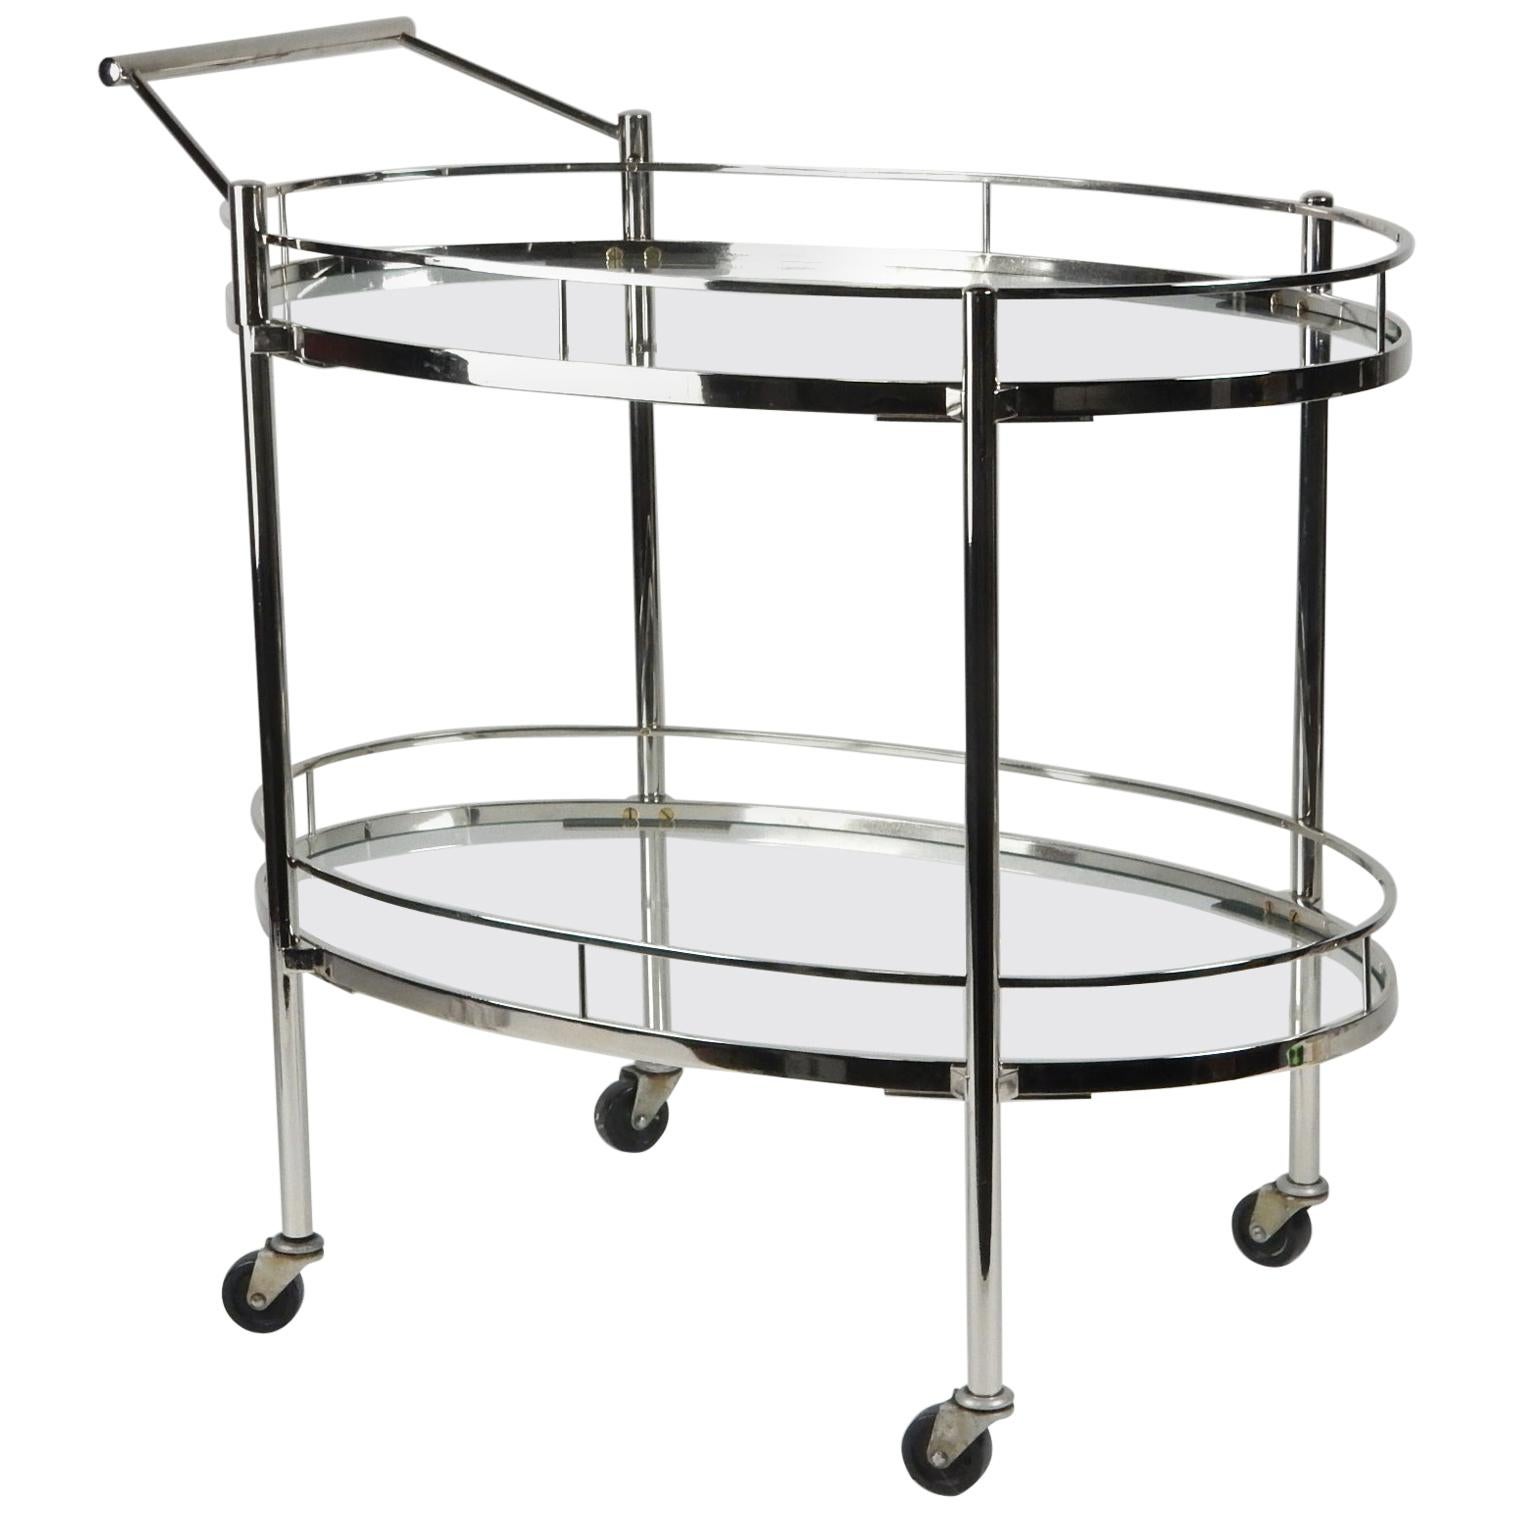 1940s Chrome Bar Cart Trolley by Maxwell-Phillips of New York